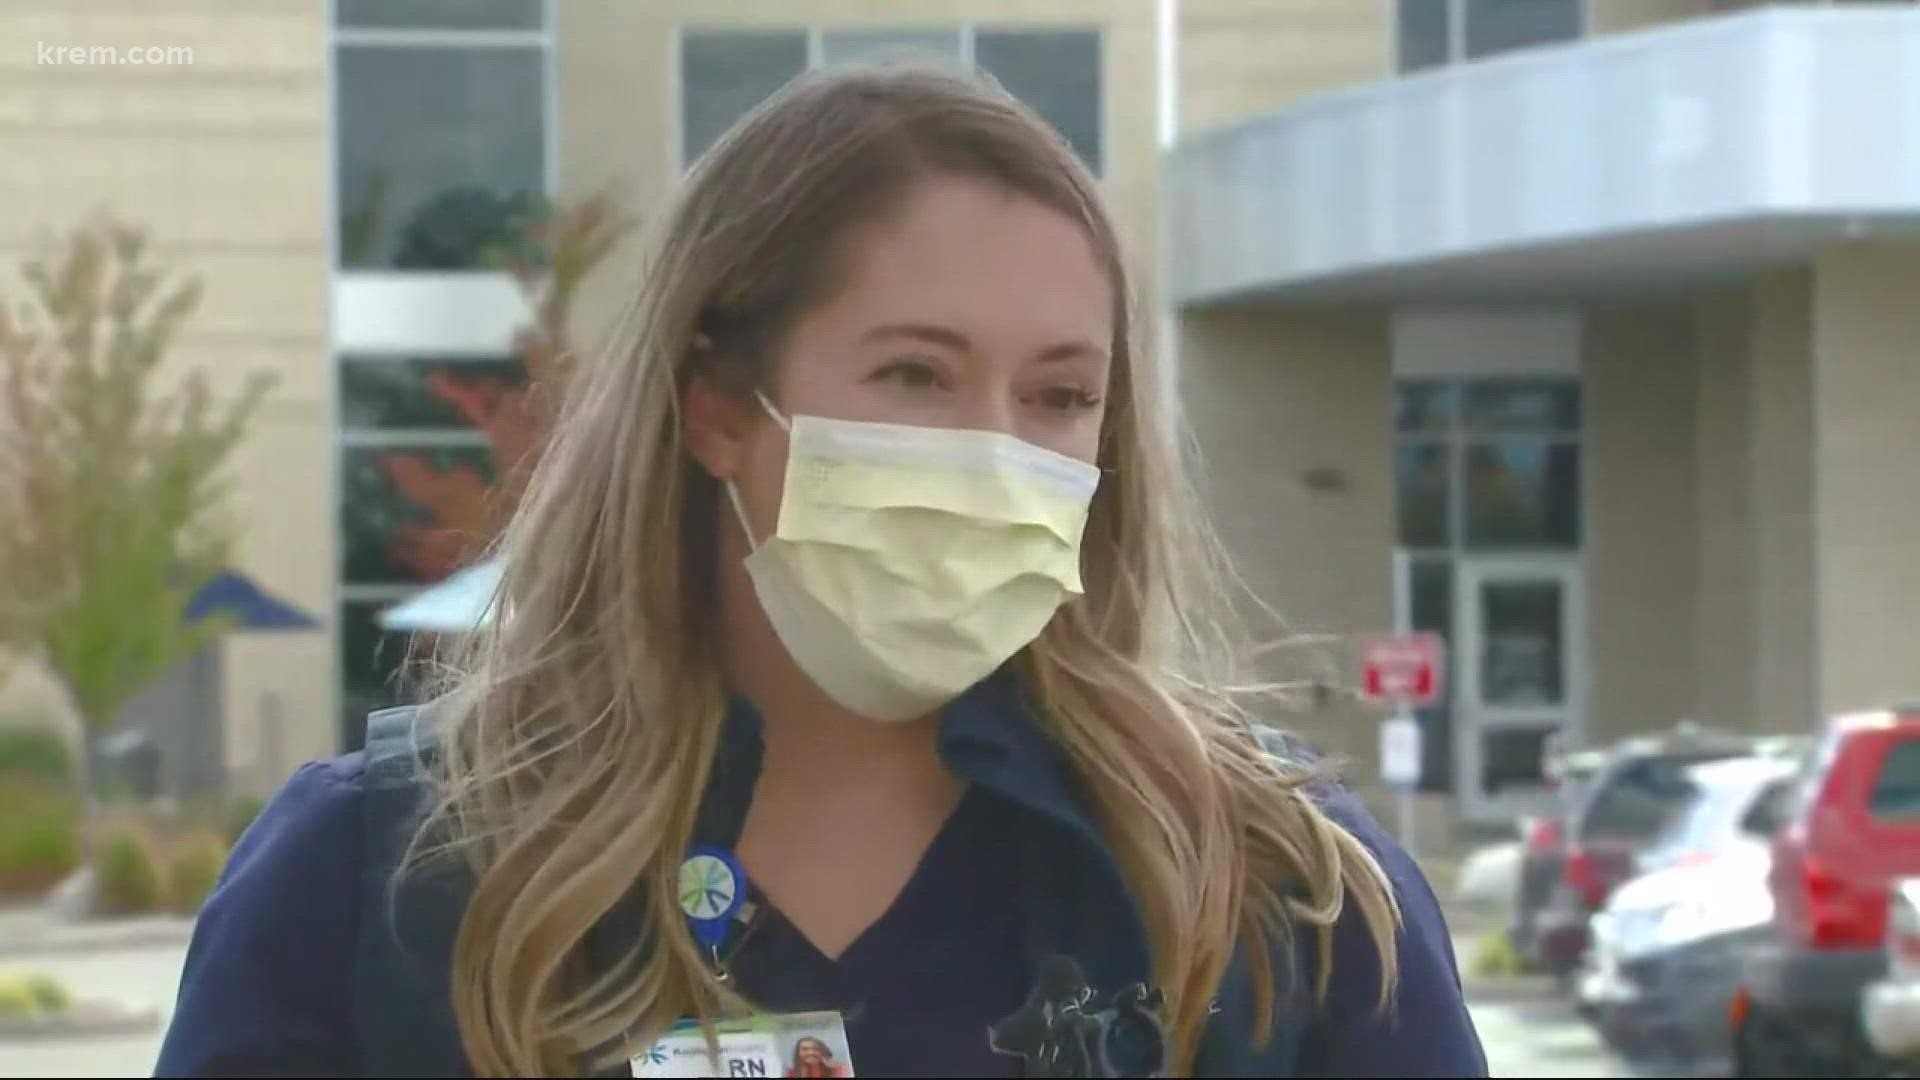 A Kootenai Health ICU nurse talked about her experience treating seriously ill COVID-19 patients amid the fifth wave of the virus.